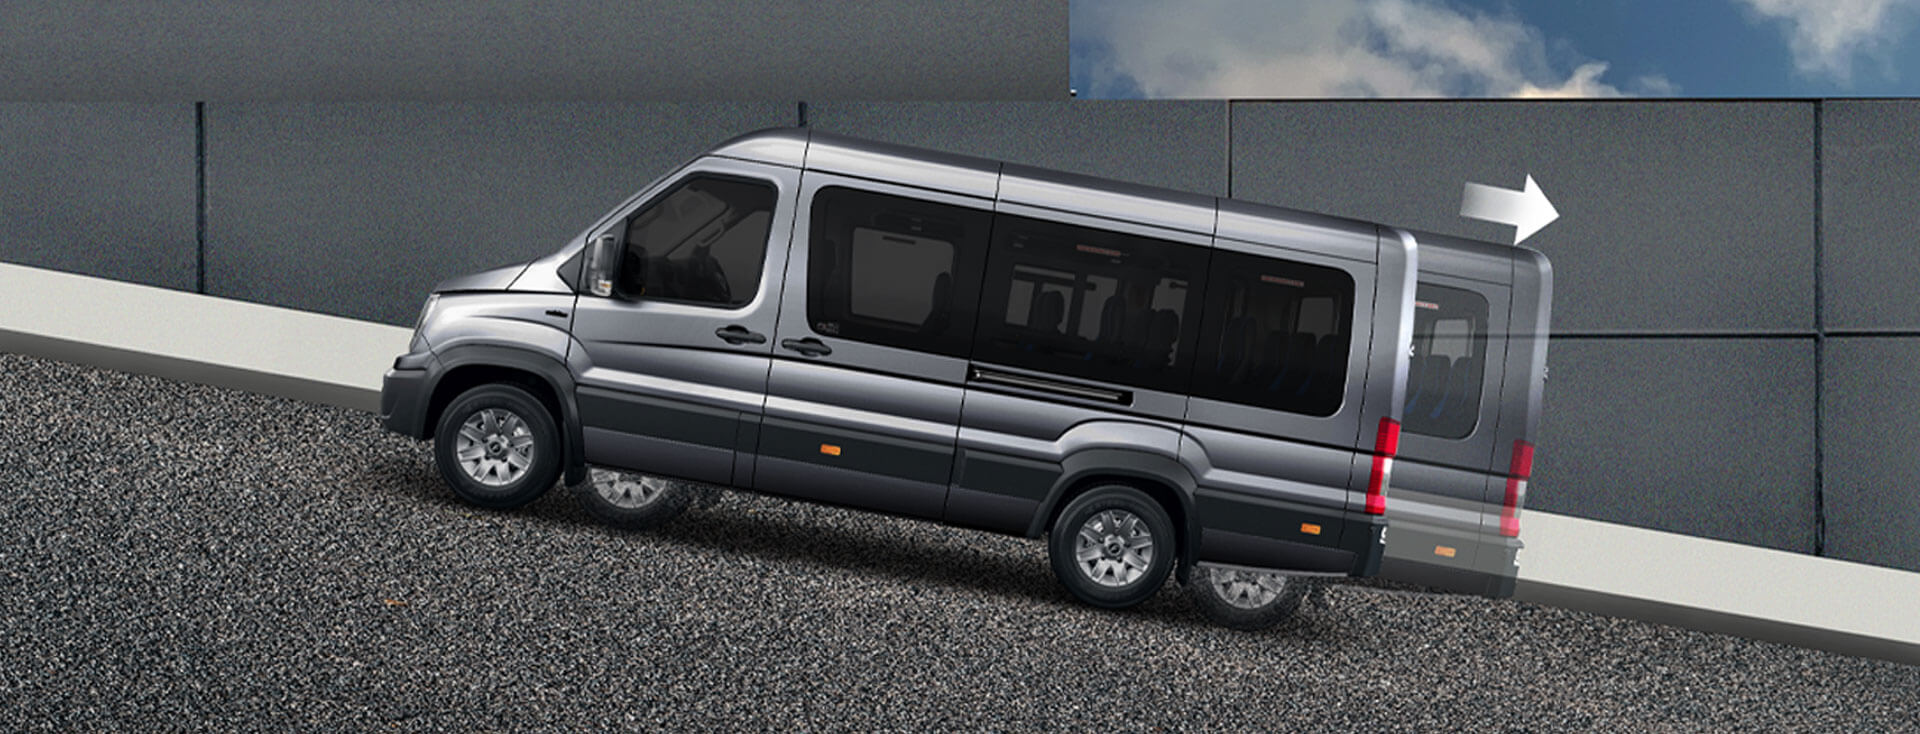 force tempo traveller new model price